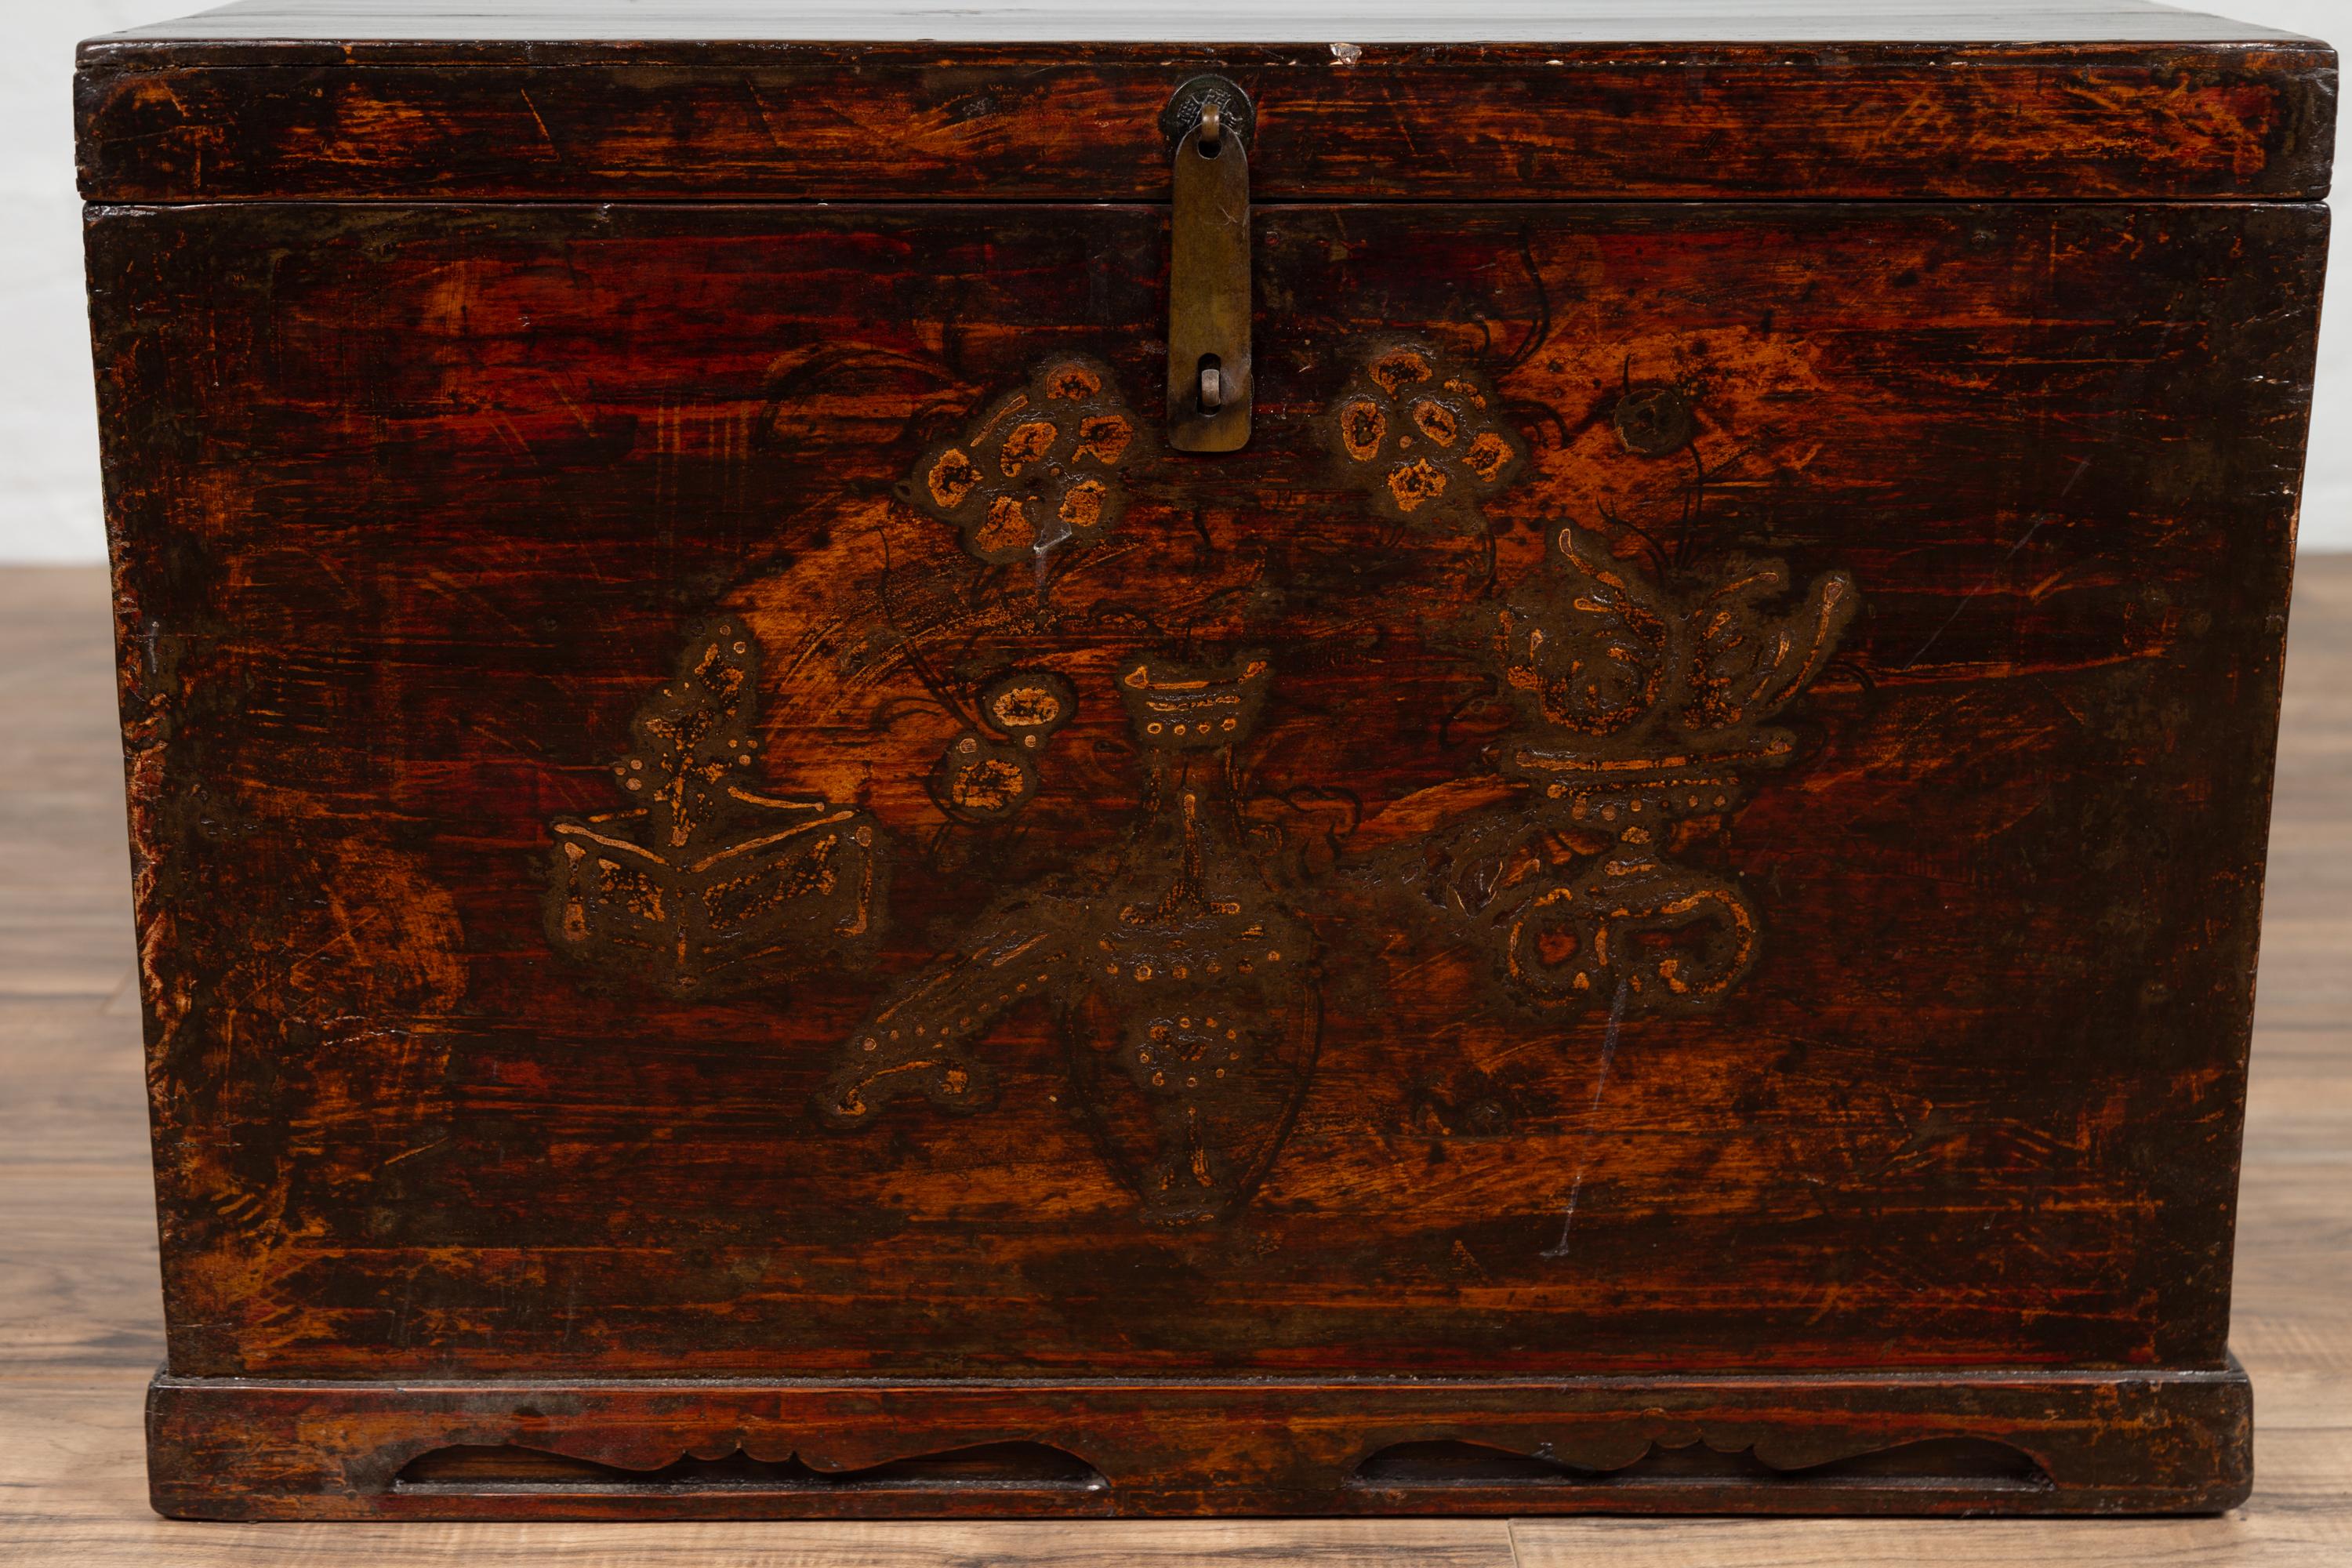 20th Century Chinese Antique Wooden Blanket Chest with Raised Decor and Polychrome Patina